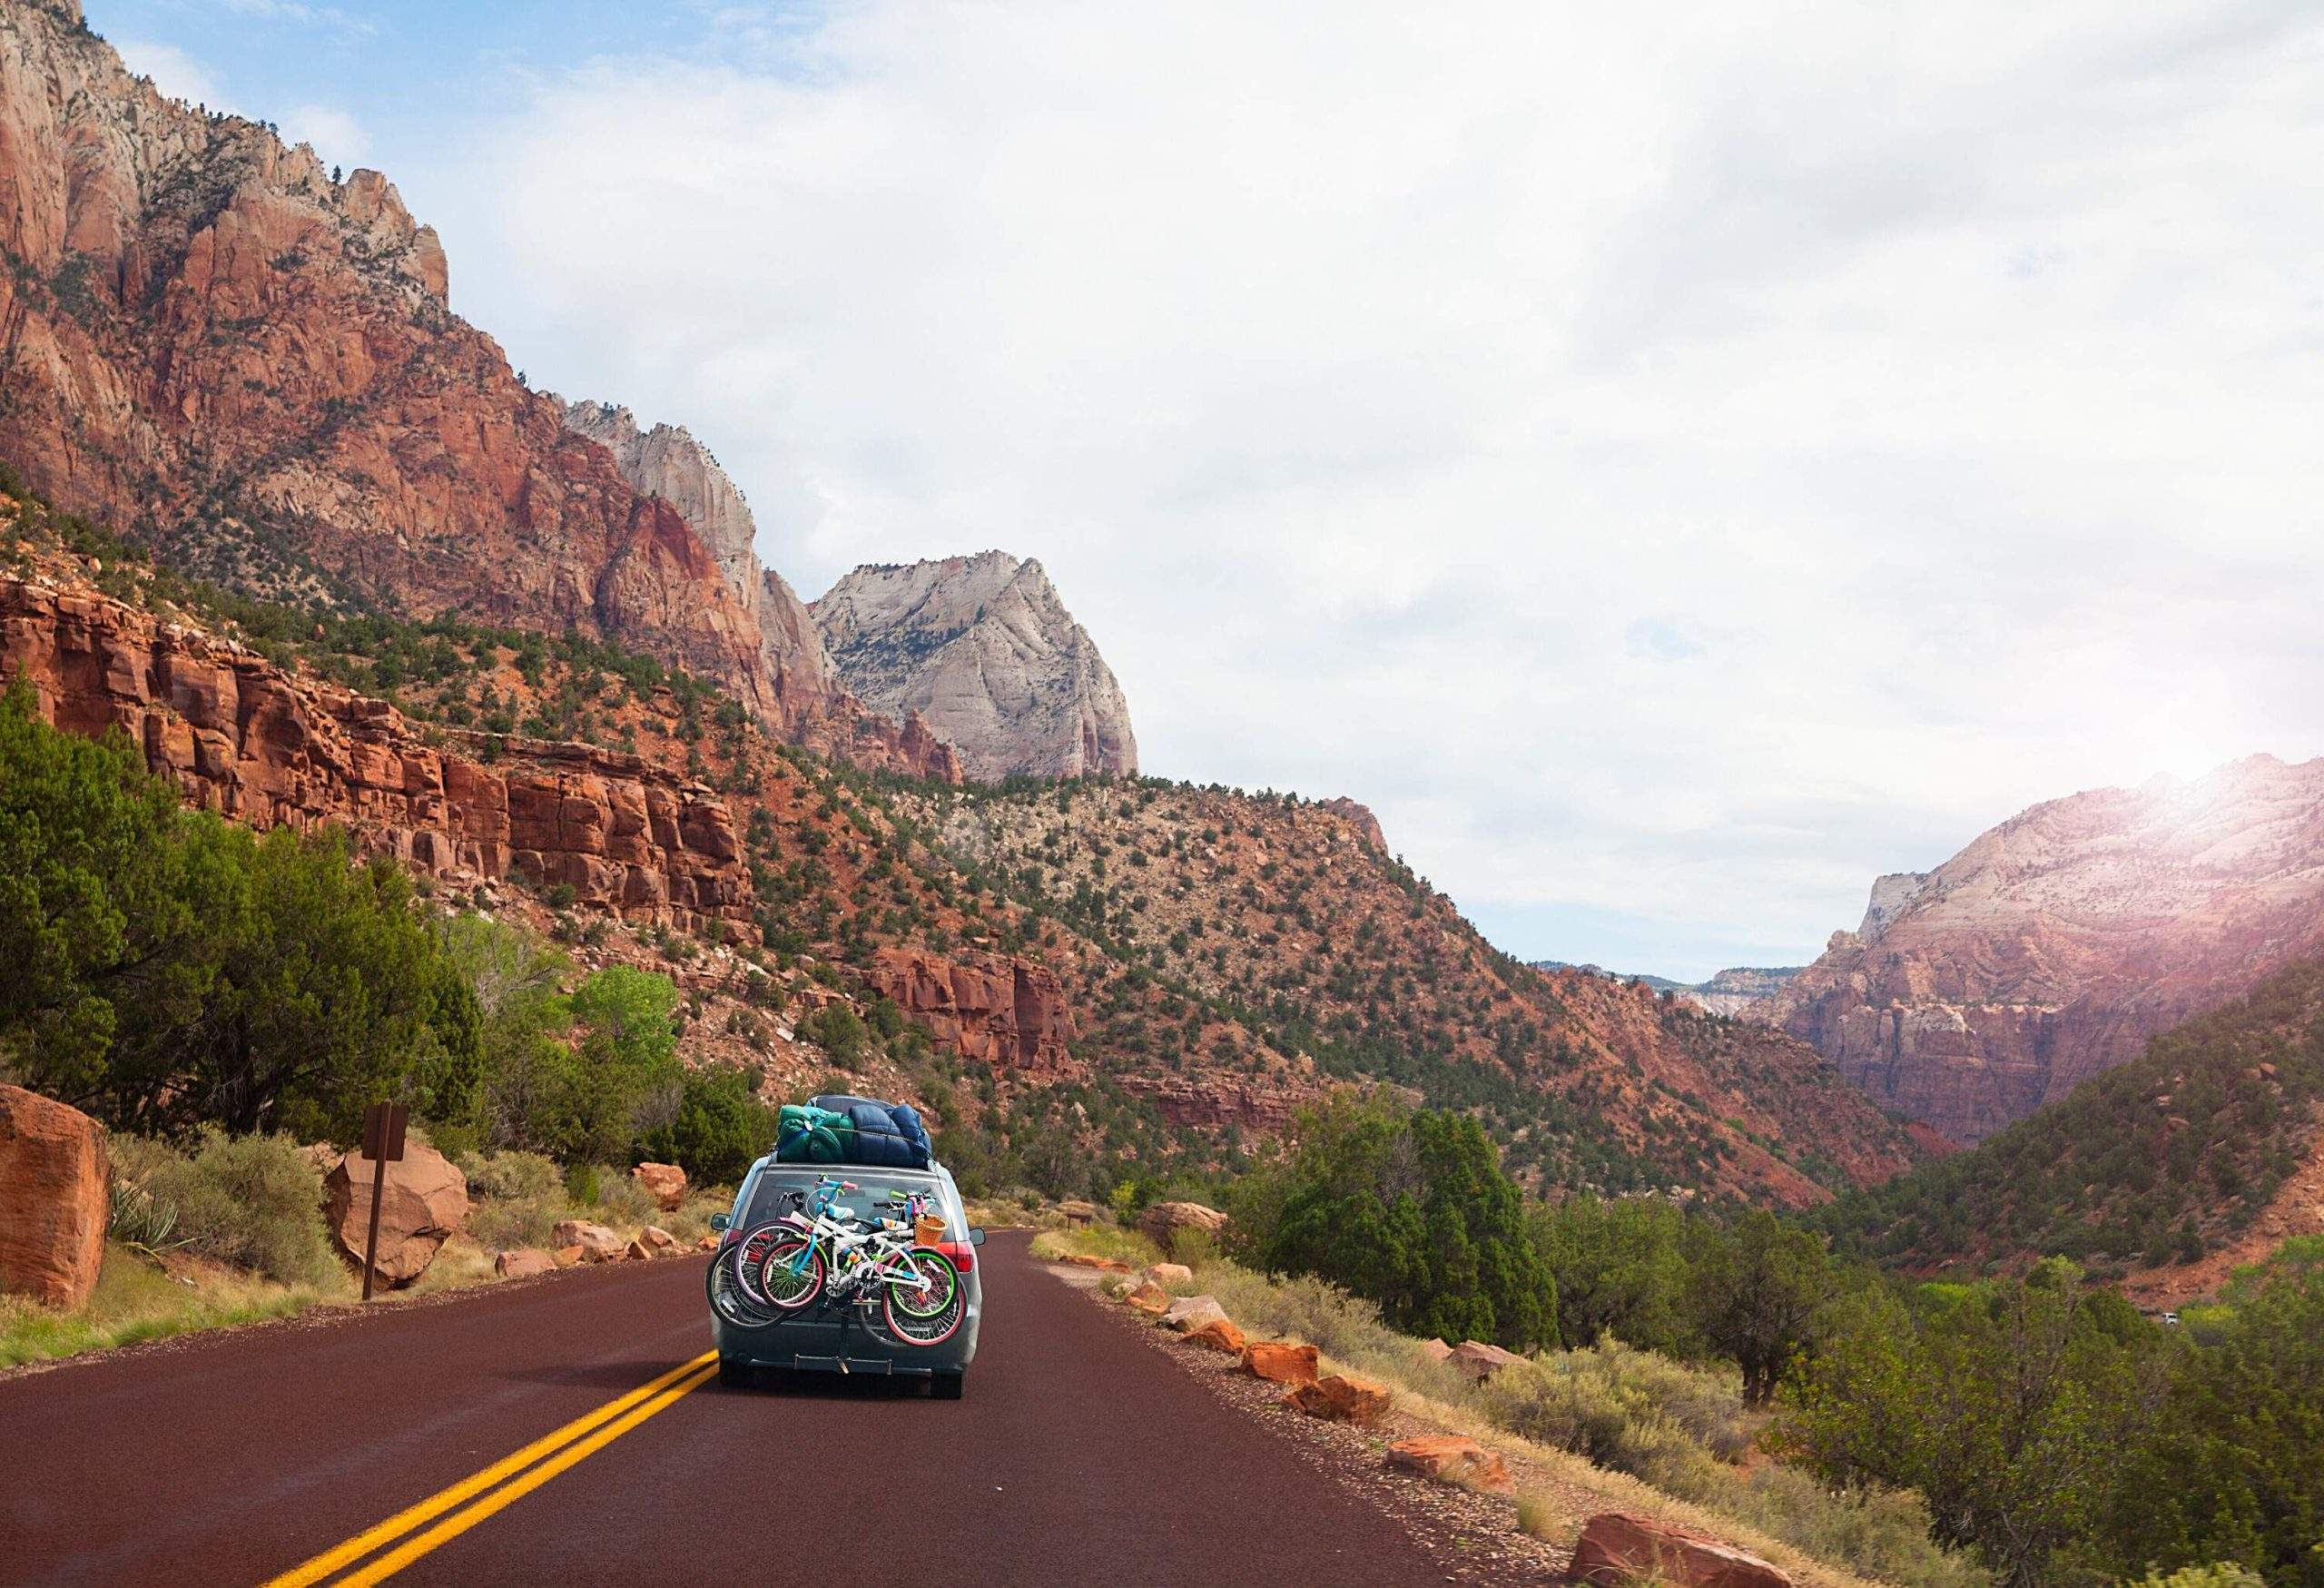 dest_usa_utah_theme_car_driving_mountains_roadtrip-gettyimages-586199646-scaled